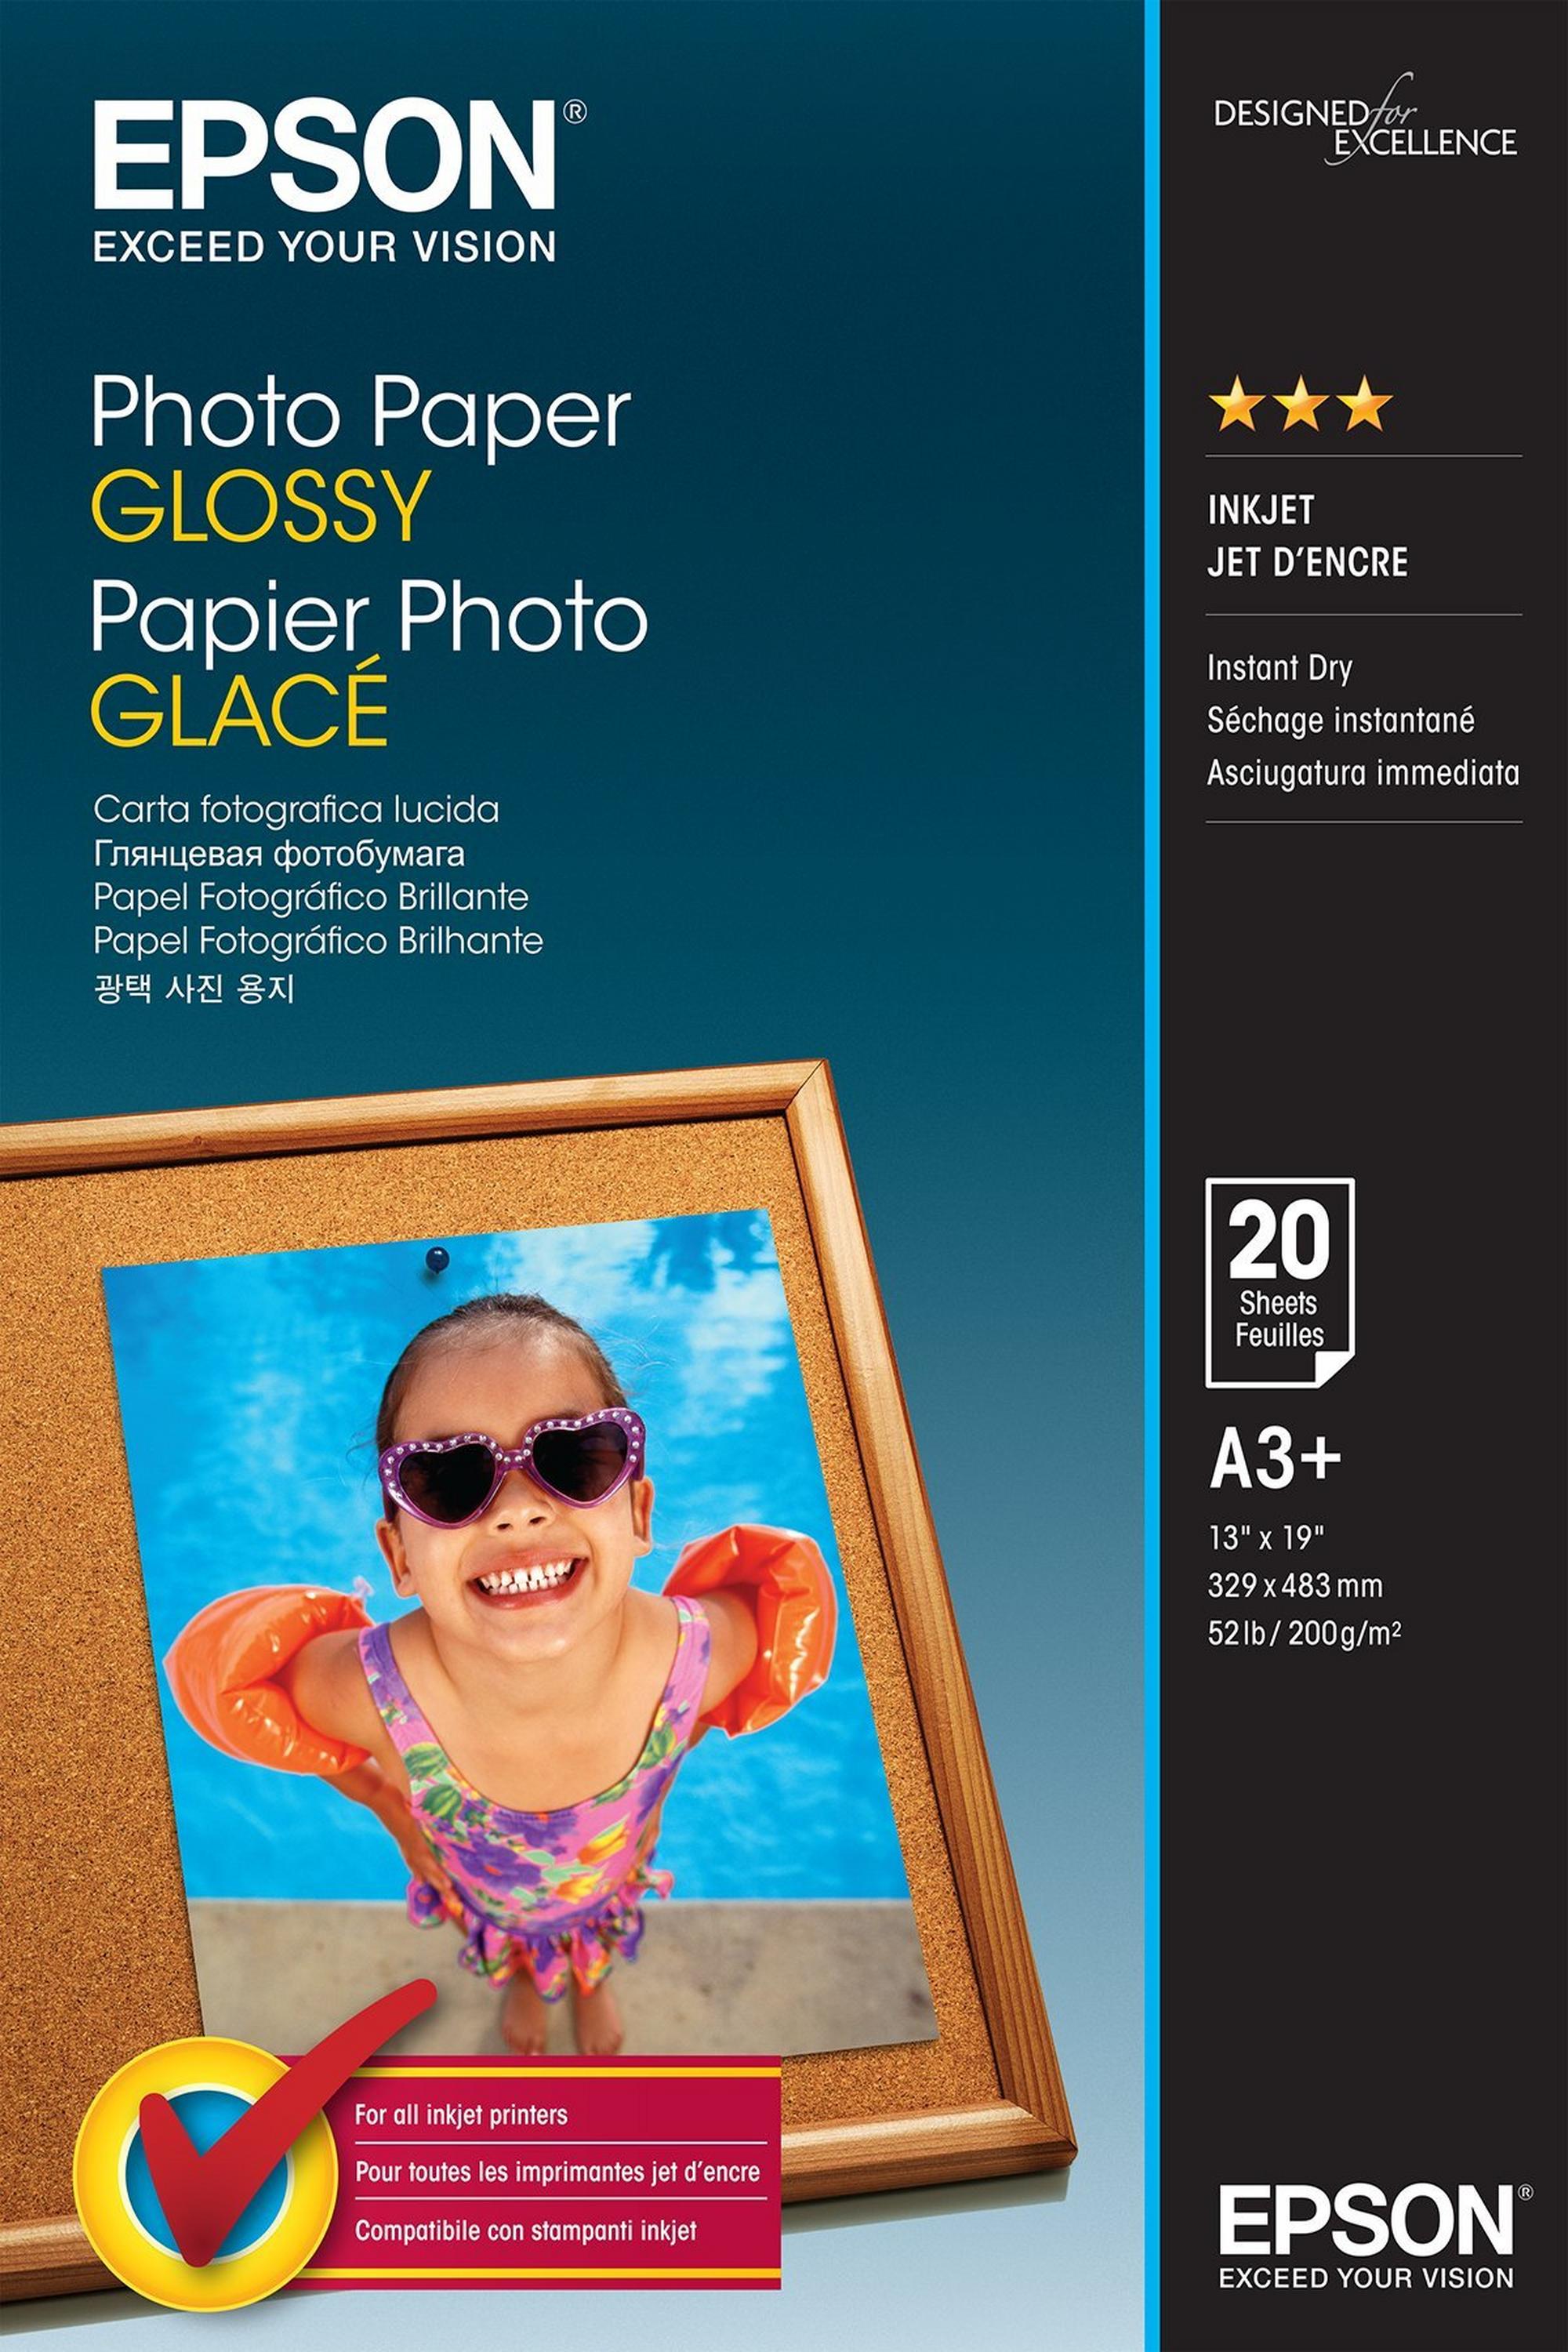 Epson Photo Paper Glossy - A3+, 200g/m² - 20 sheets